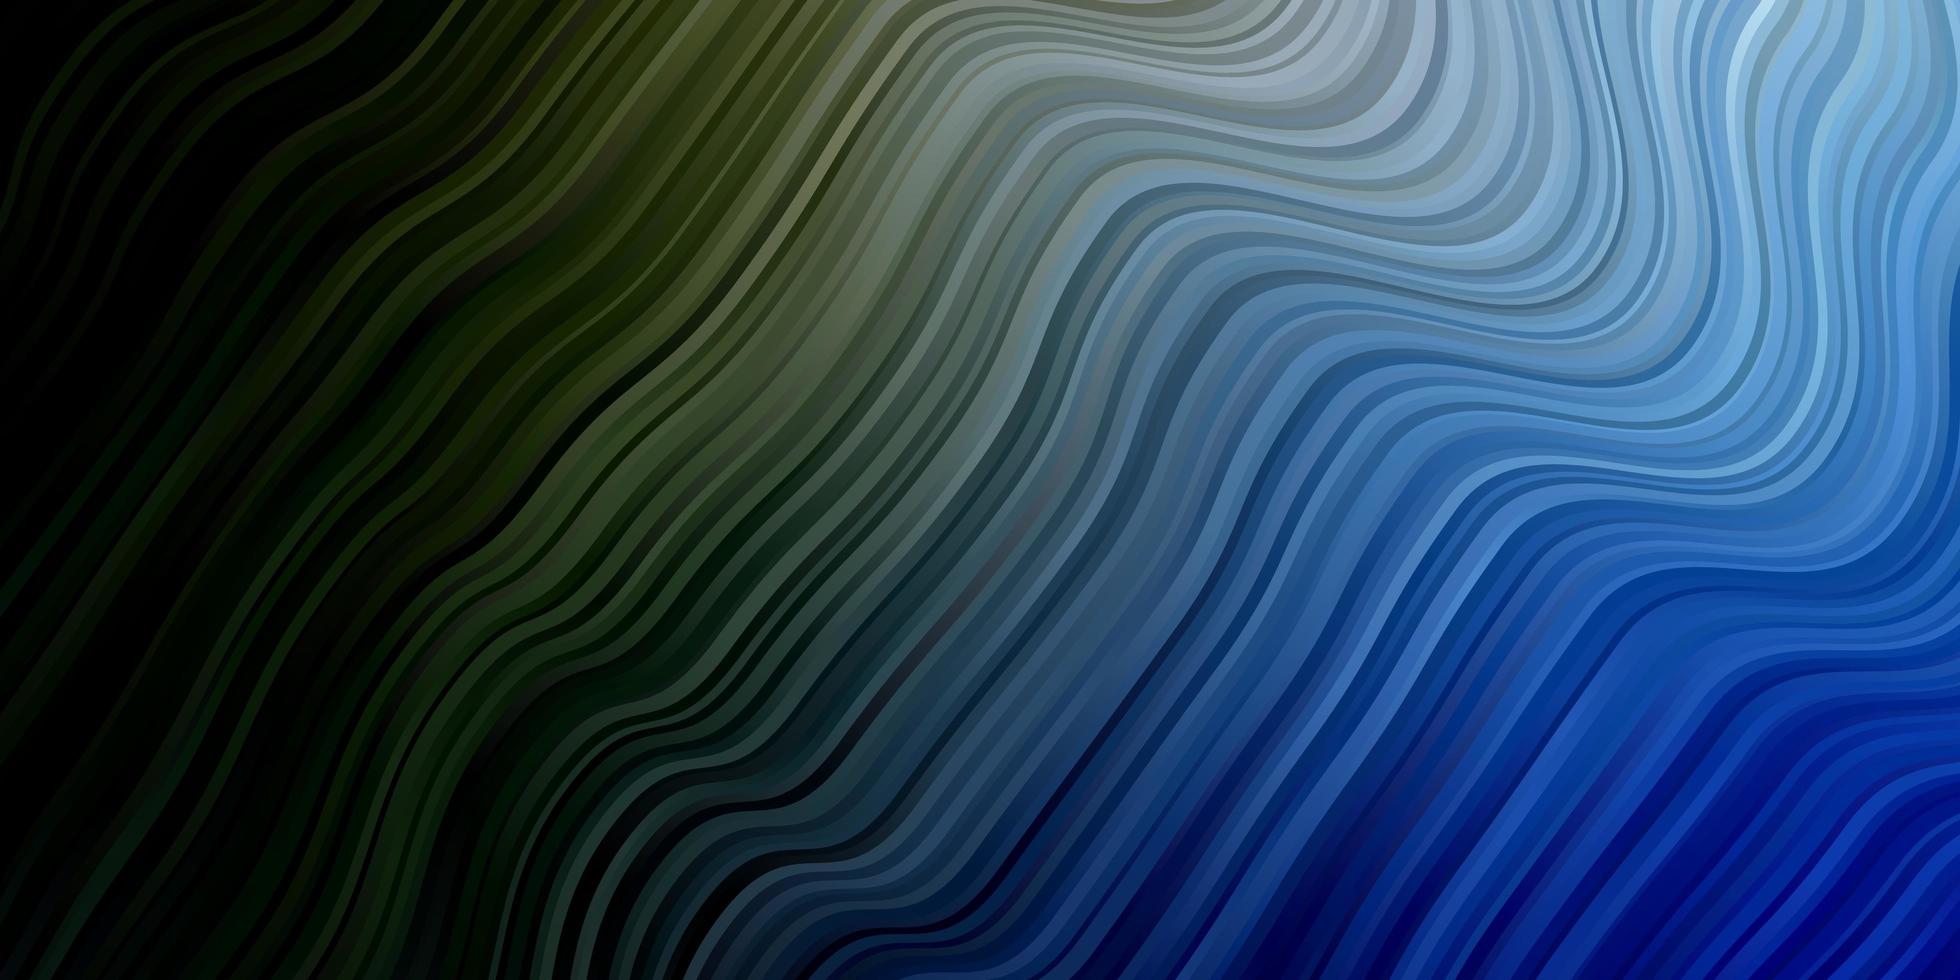 Dark Blue, Green vector template with wry lines.